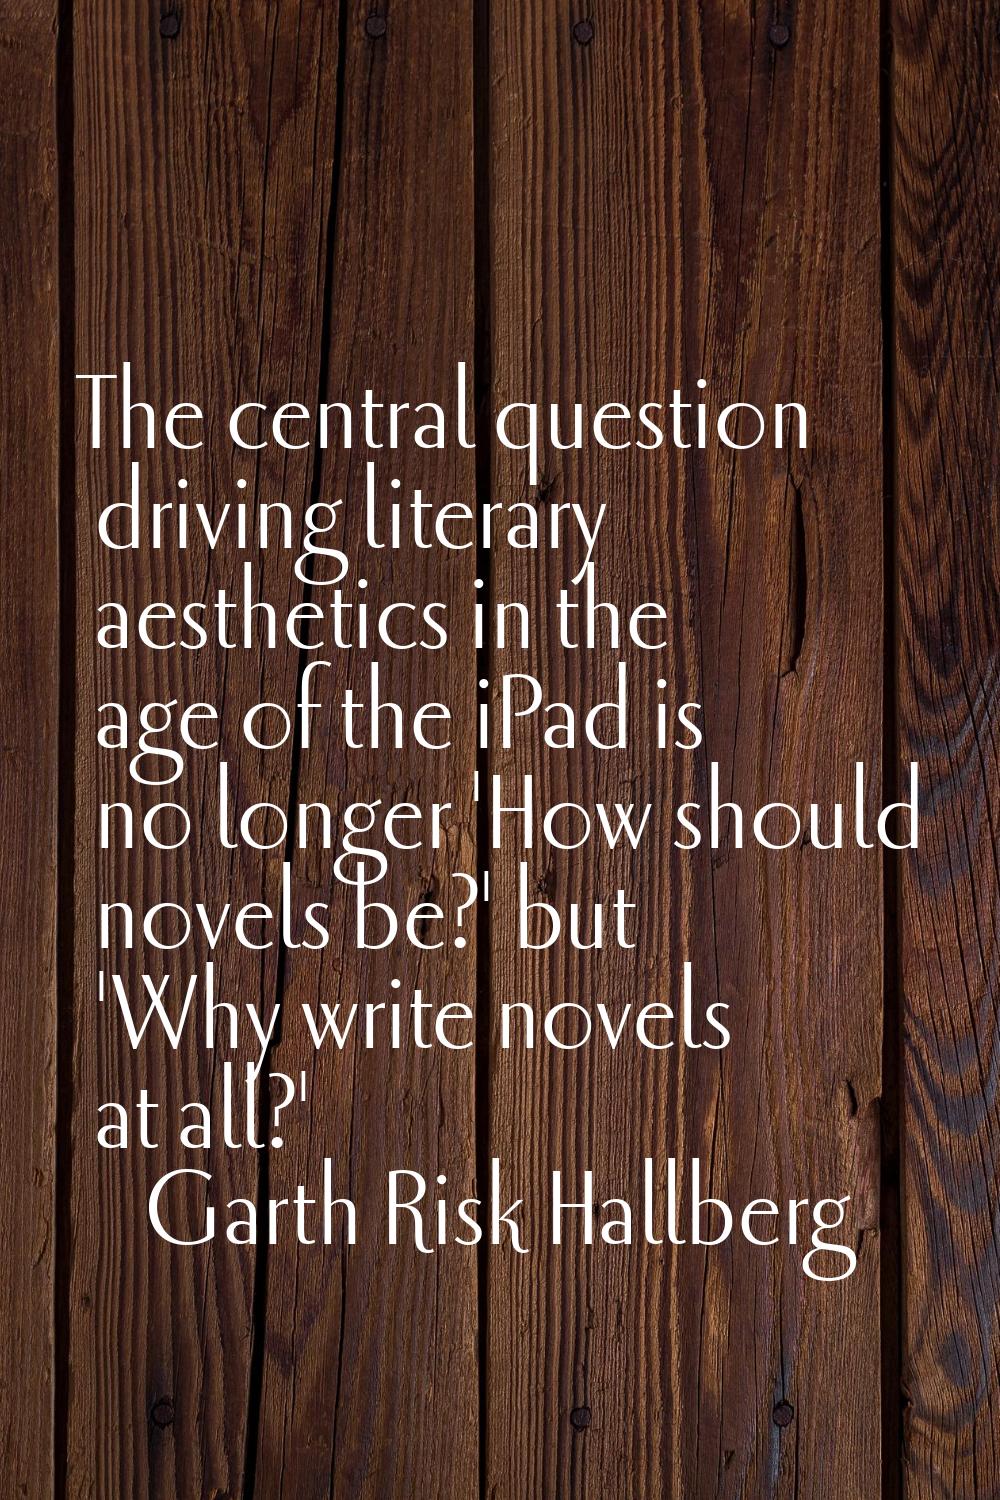 The central question driving literary aesthetics in the age of the iPad is no longer 'How should no